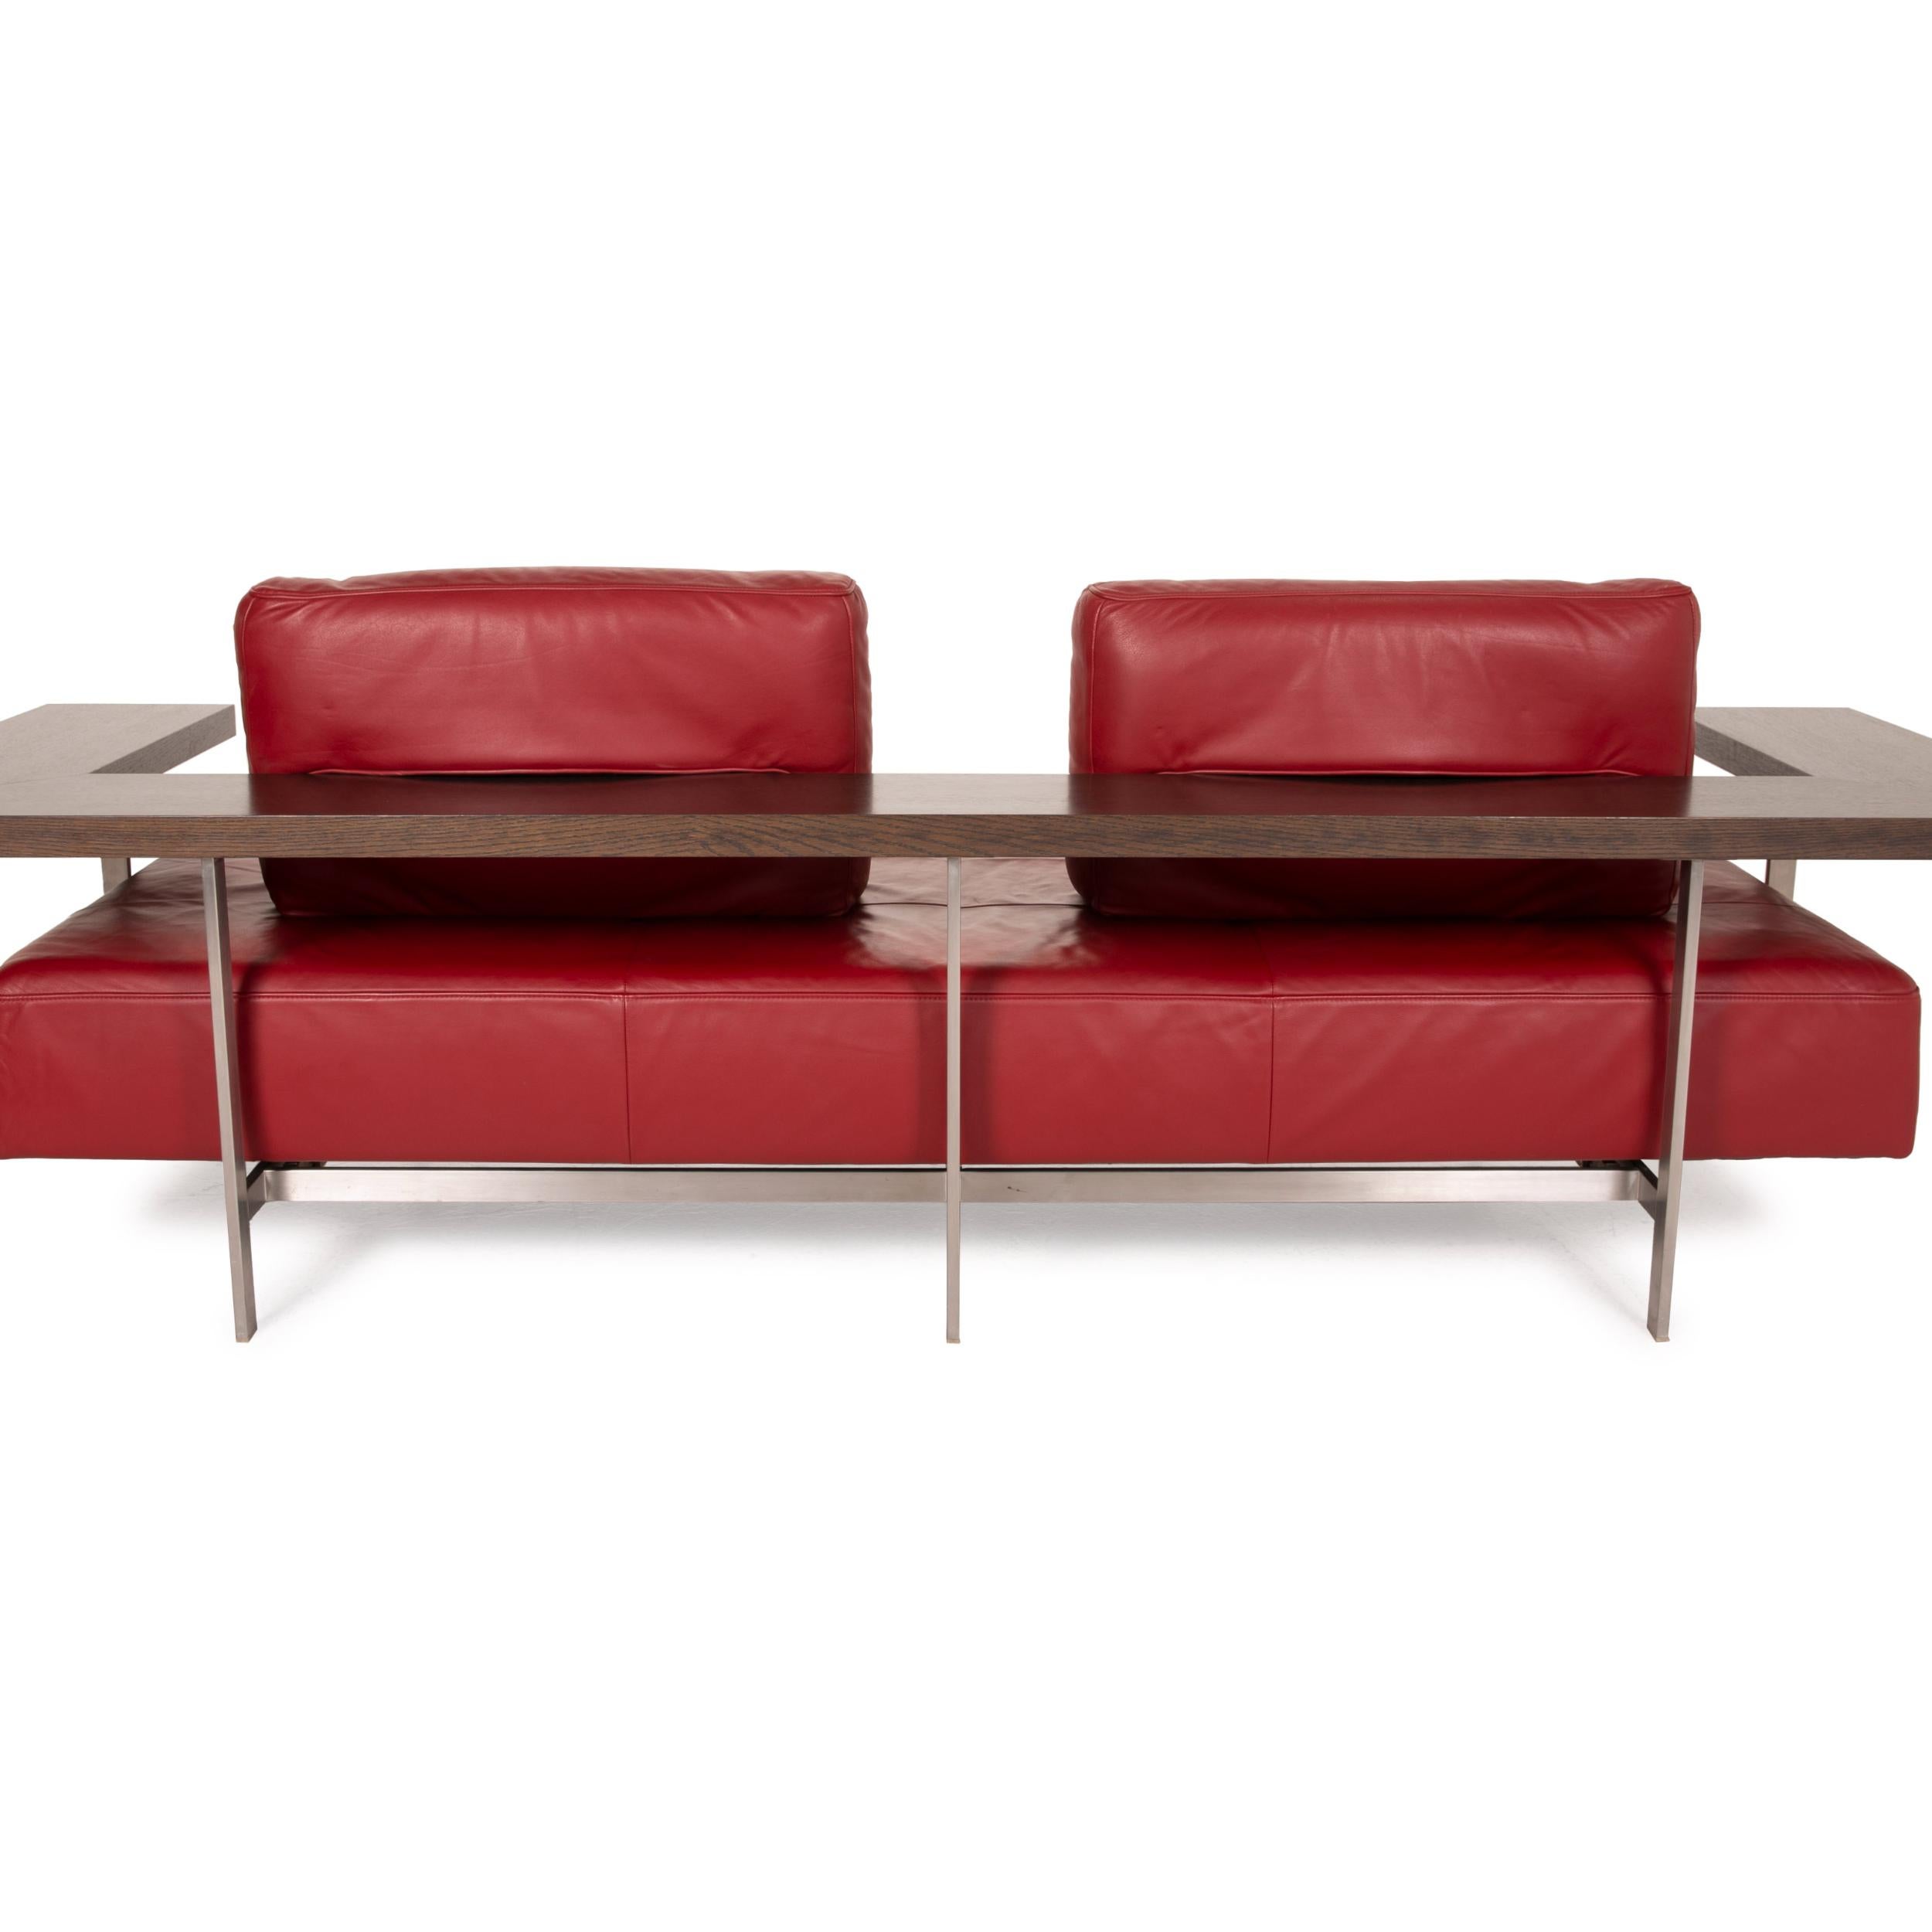 Rolf Benz Dono leather sofa red two-seater couch 4